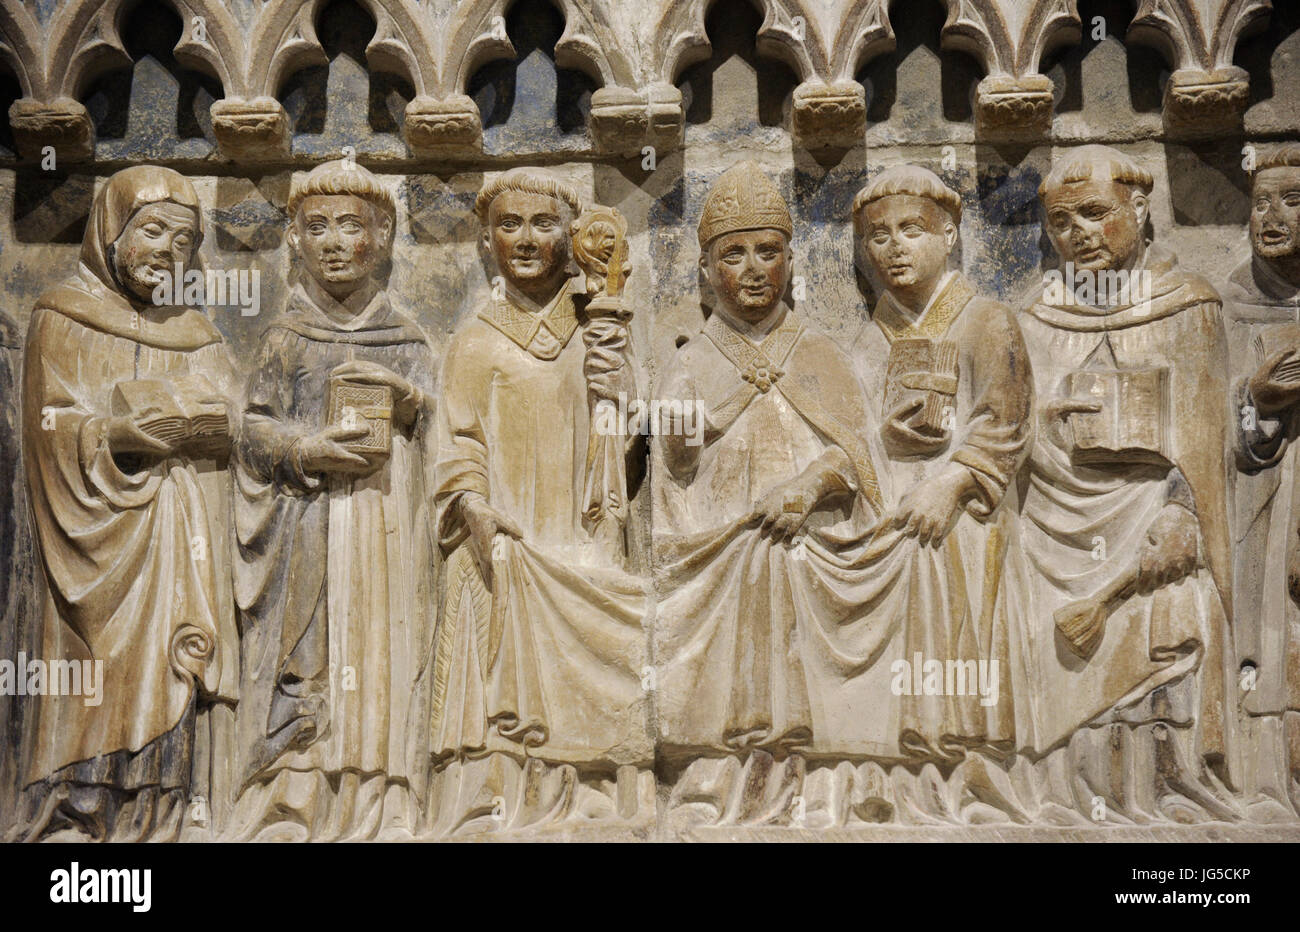 Anonymous. Catalonia. Sepulchre of the Ardevol family, second half of 14th century. Detail. Gothic. From the Chapel of Corpus Christi of the Palace of the Marquis of la Floresta, Tarrega, Lleida province. National Art Museum of Catalonia. Barcelona. Catalonia. Spain. Stock Photo